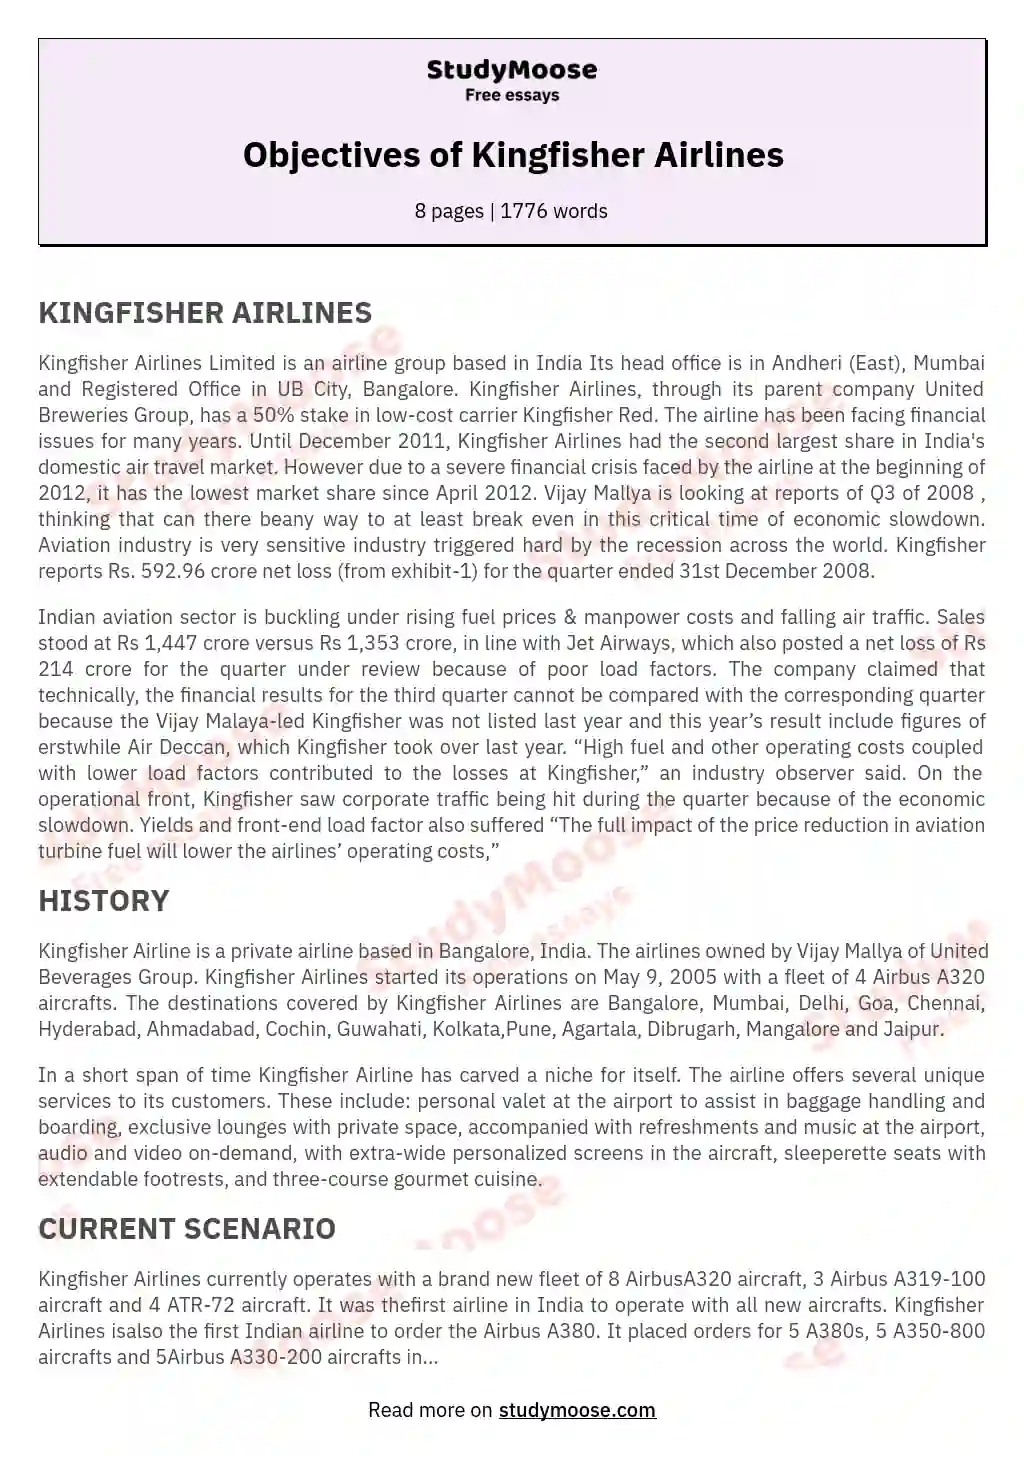 Objectives of Kingfisher Airlines essay